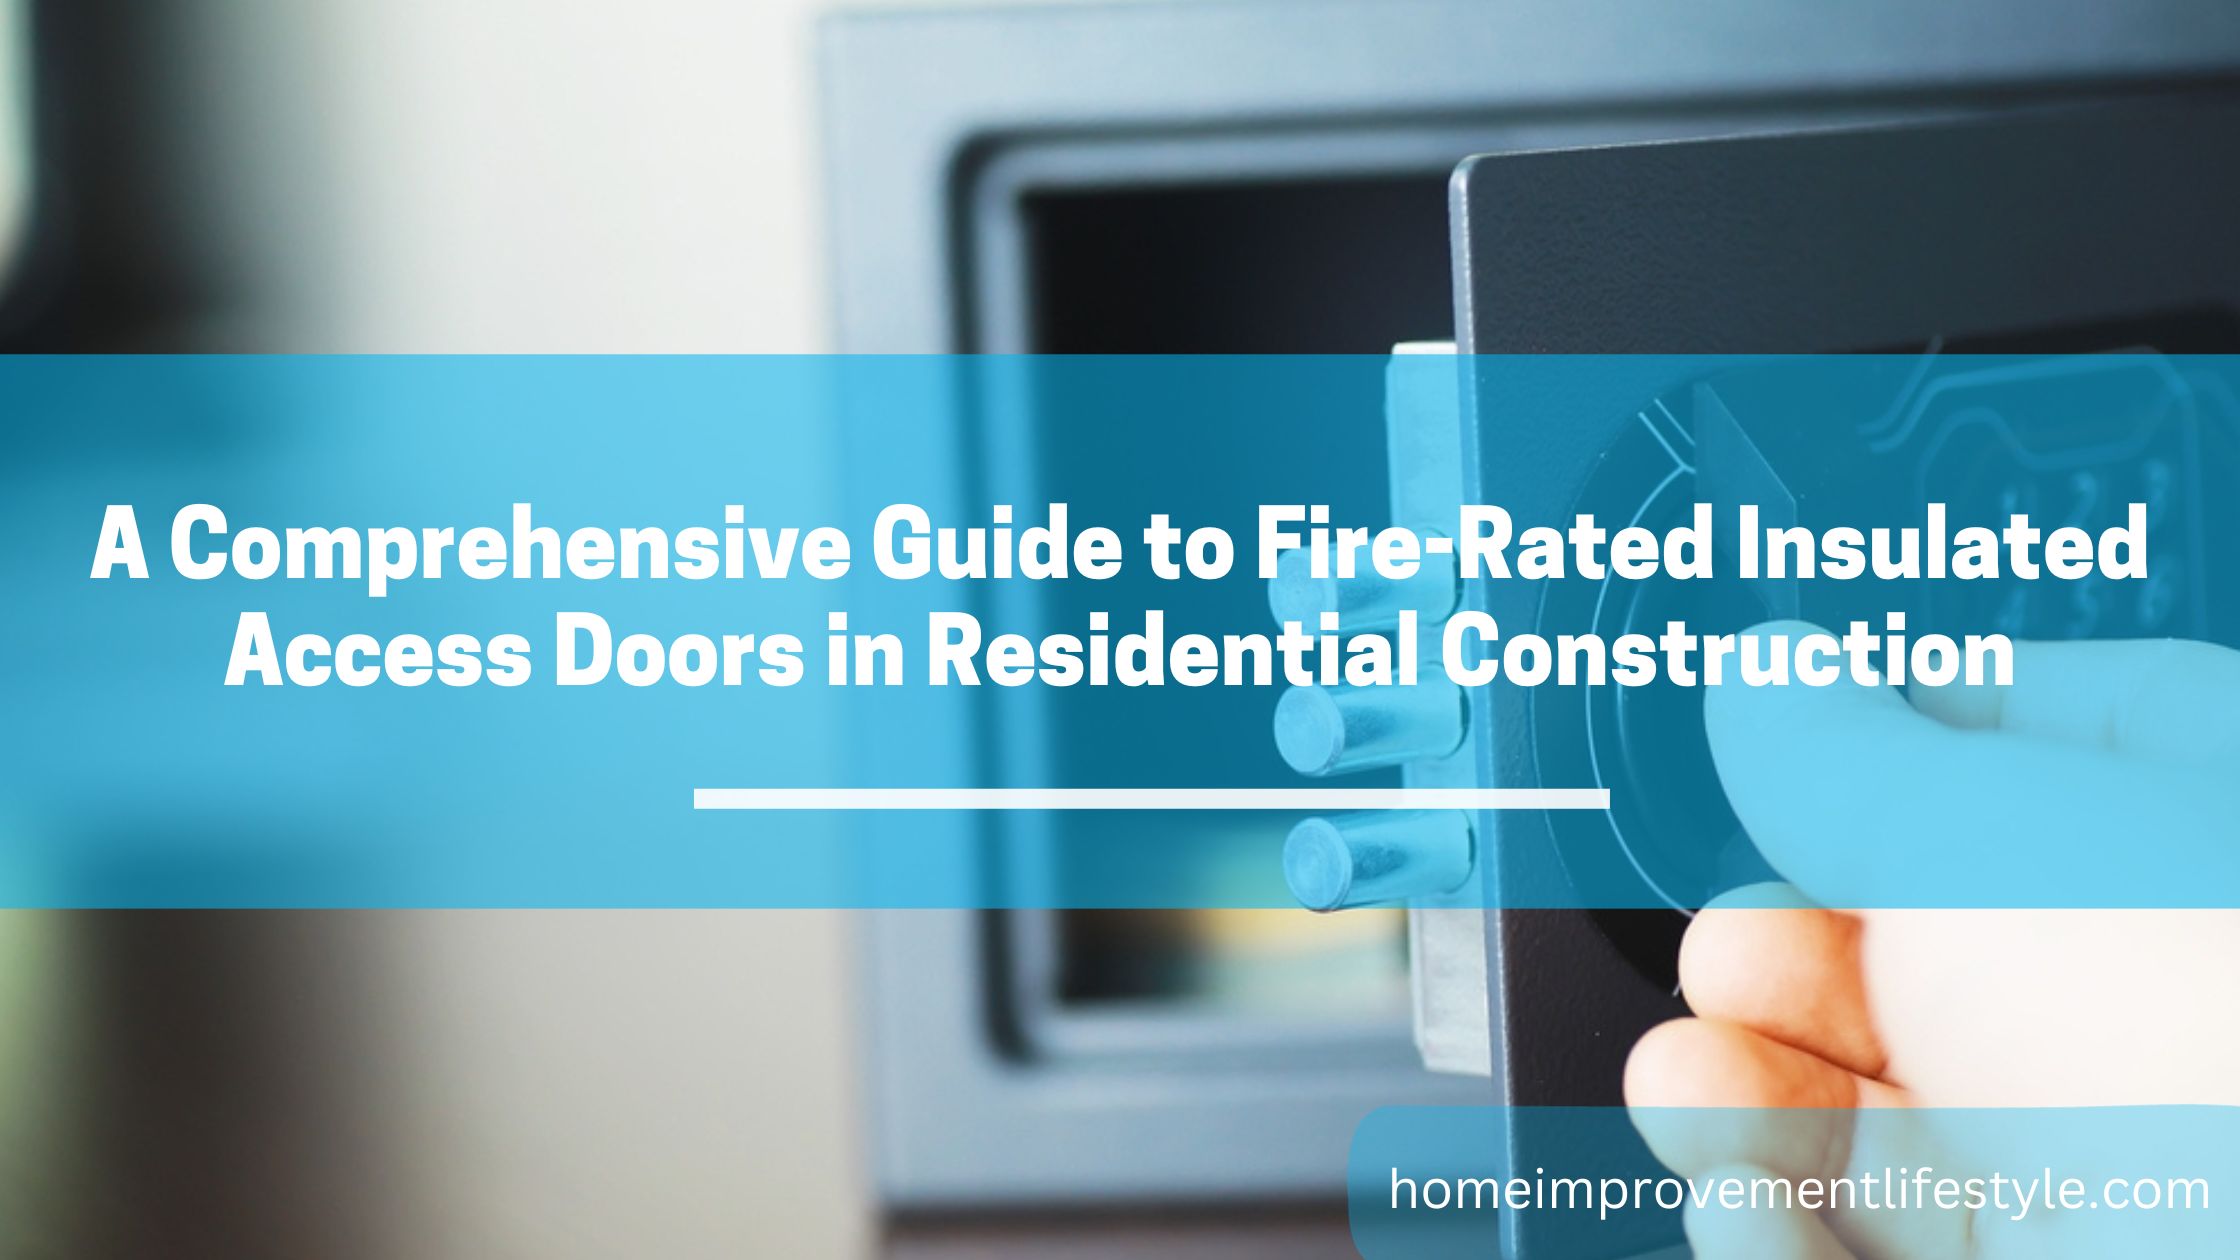 A Comprehensive Guide to Fire-Rated Insulated Access Doors in Residential Construction